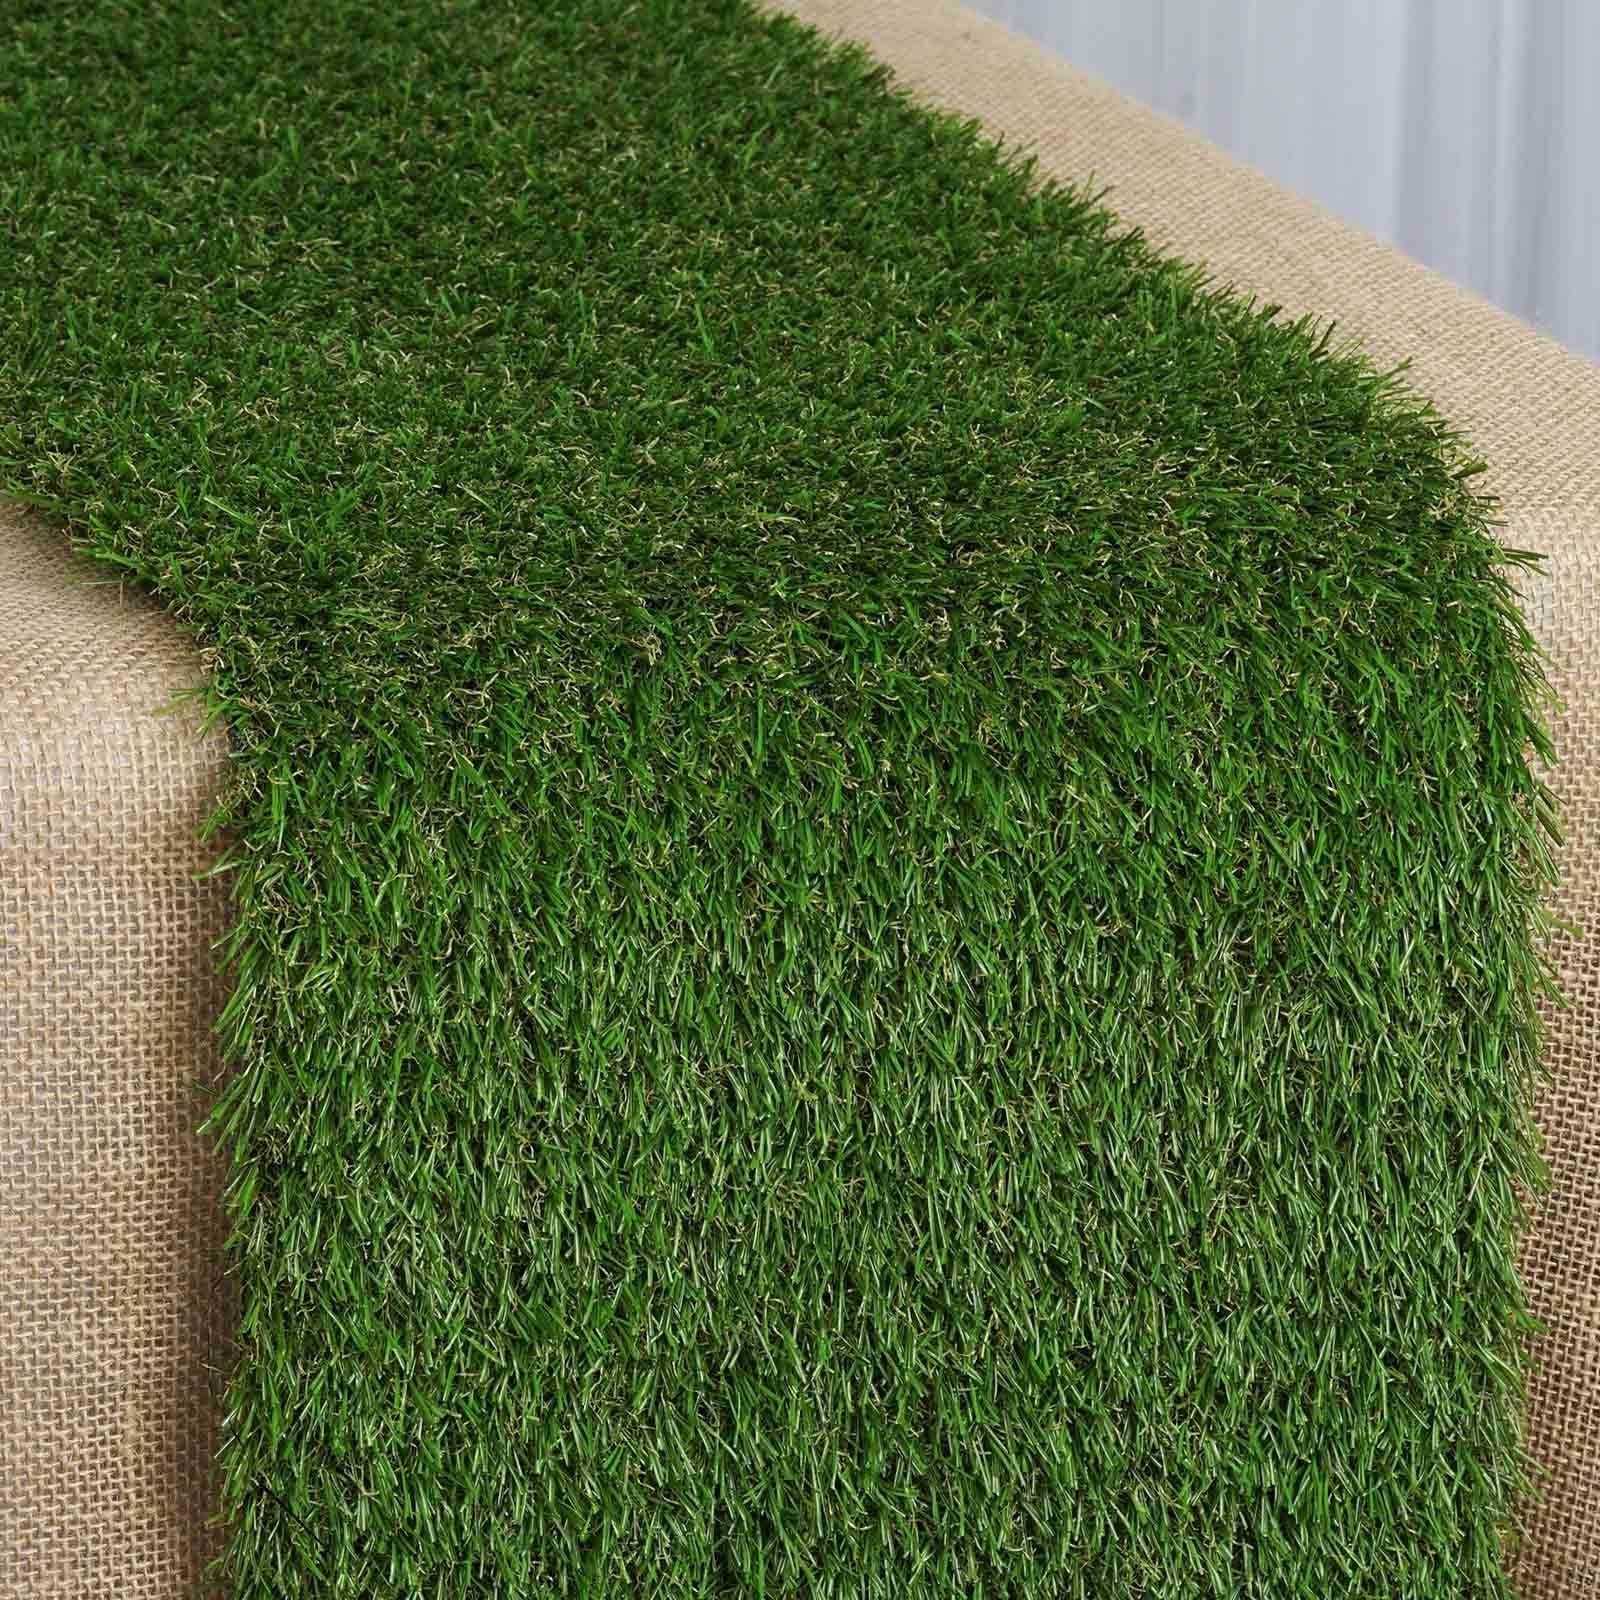 get-the-official-green-all-weather-artificial-grass-table-runner-9ft-discount_6.jpg